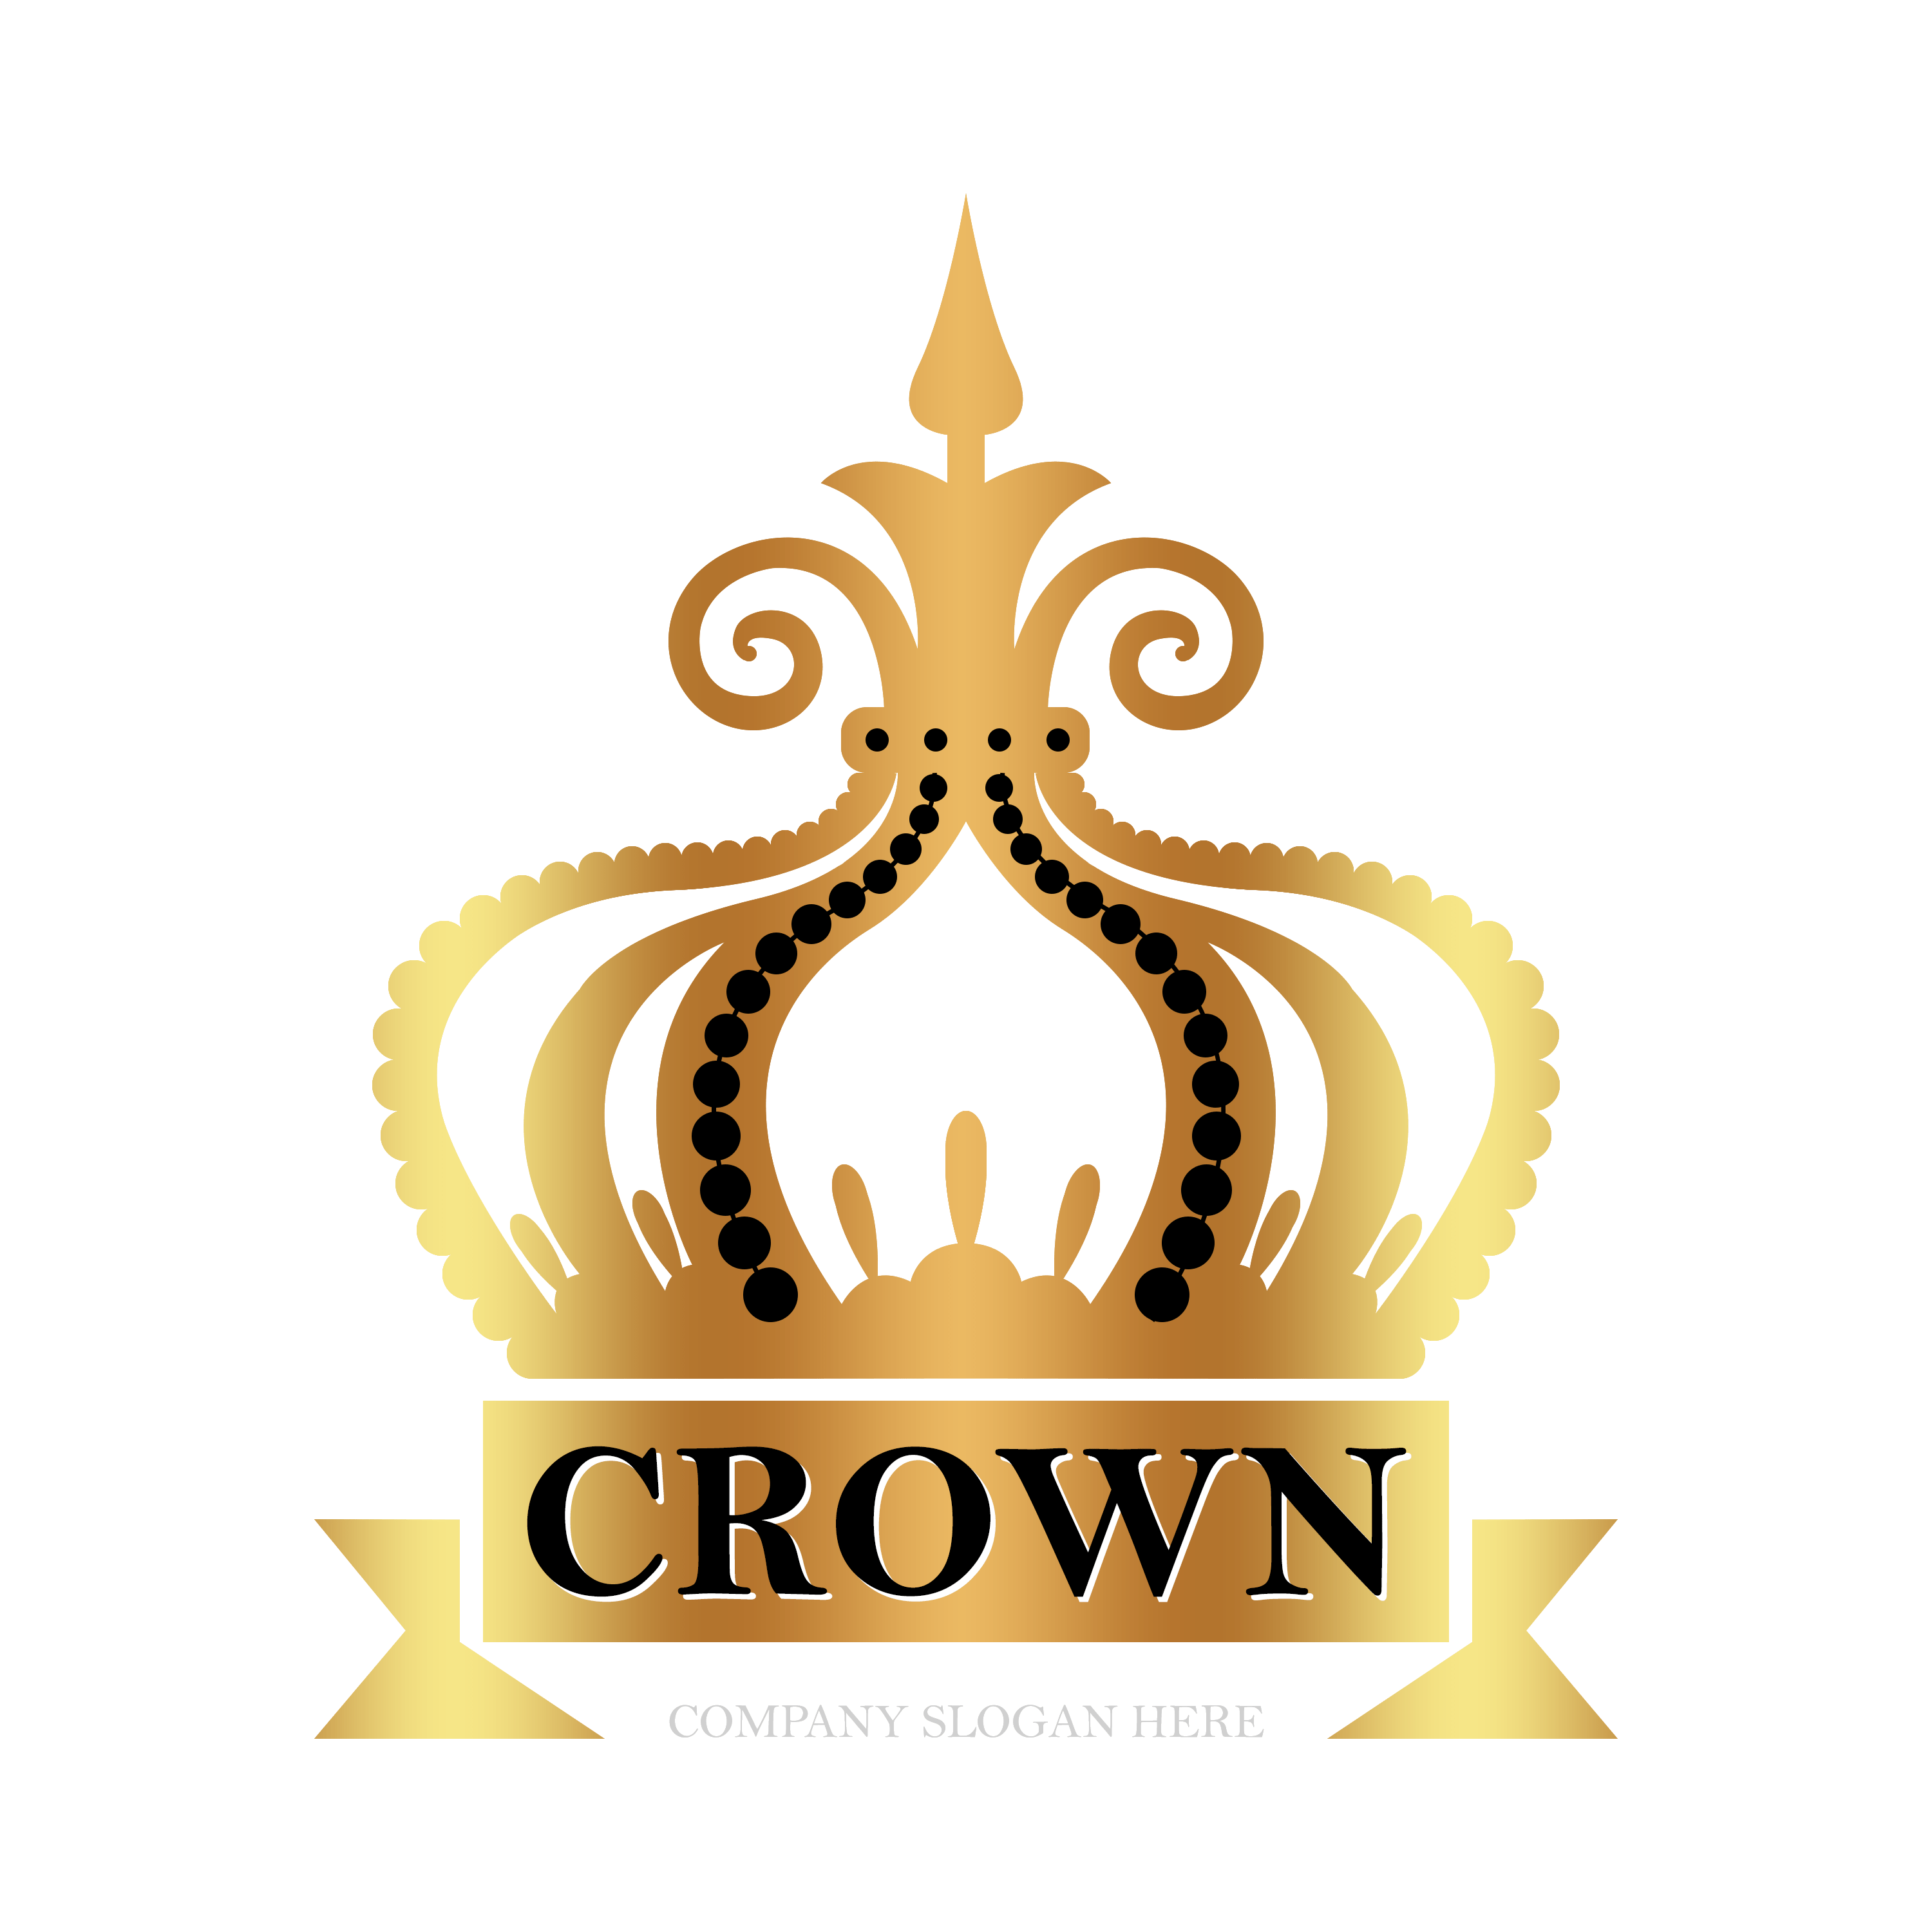 Golden Crowns Png Free Download - Photo #1701 - PngFile.net | Free PNG  Images Download